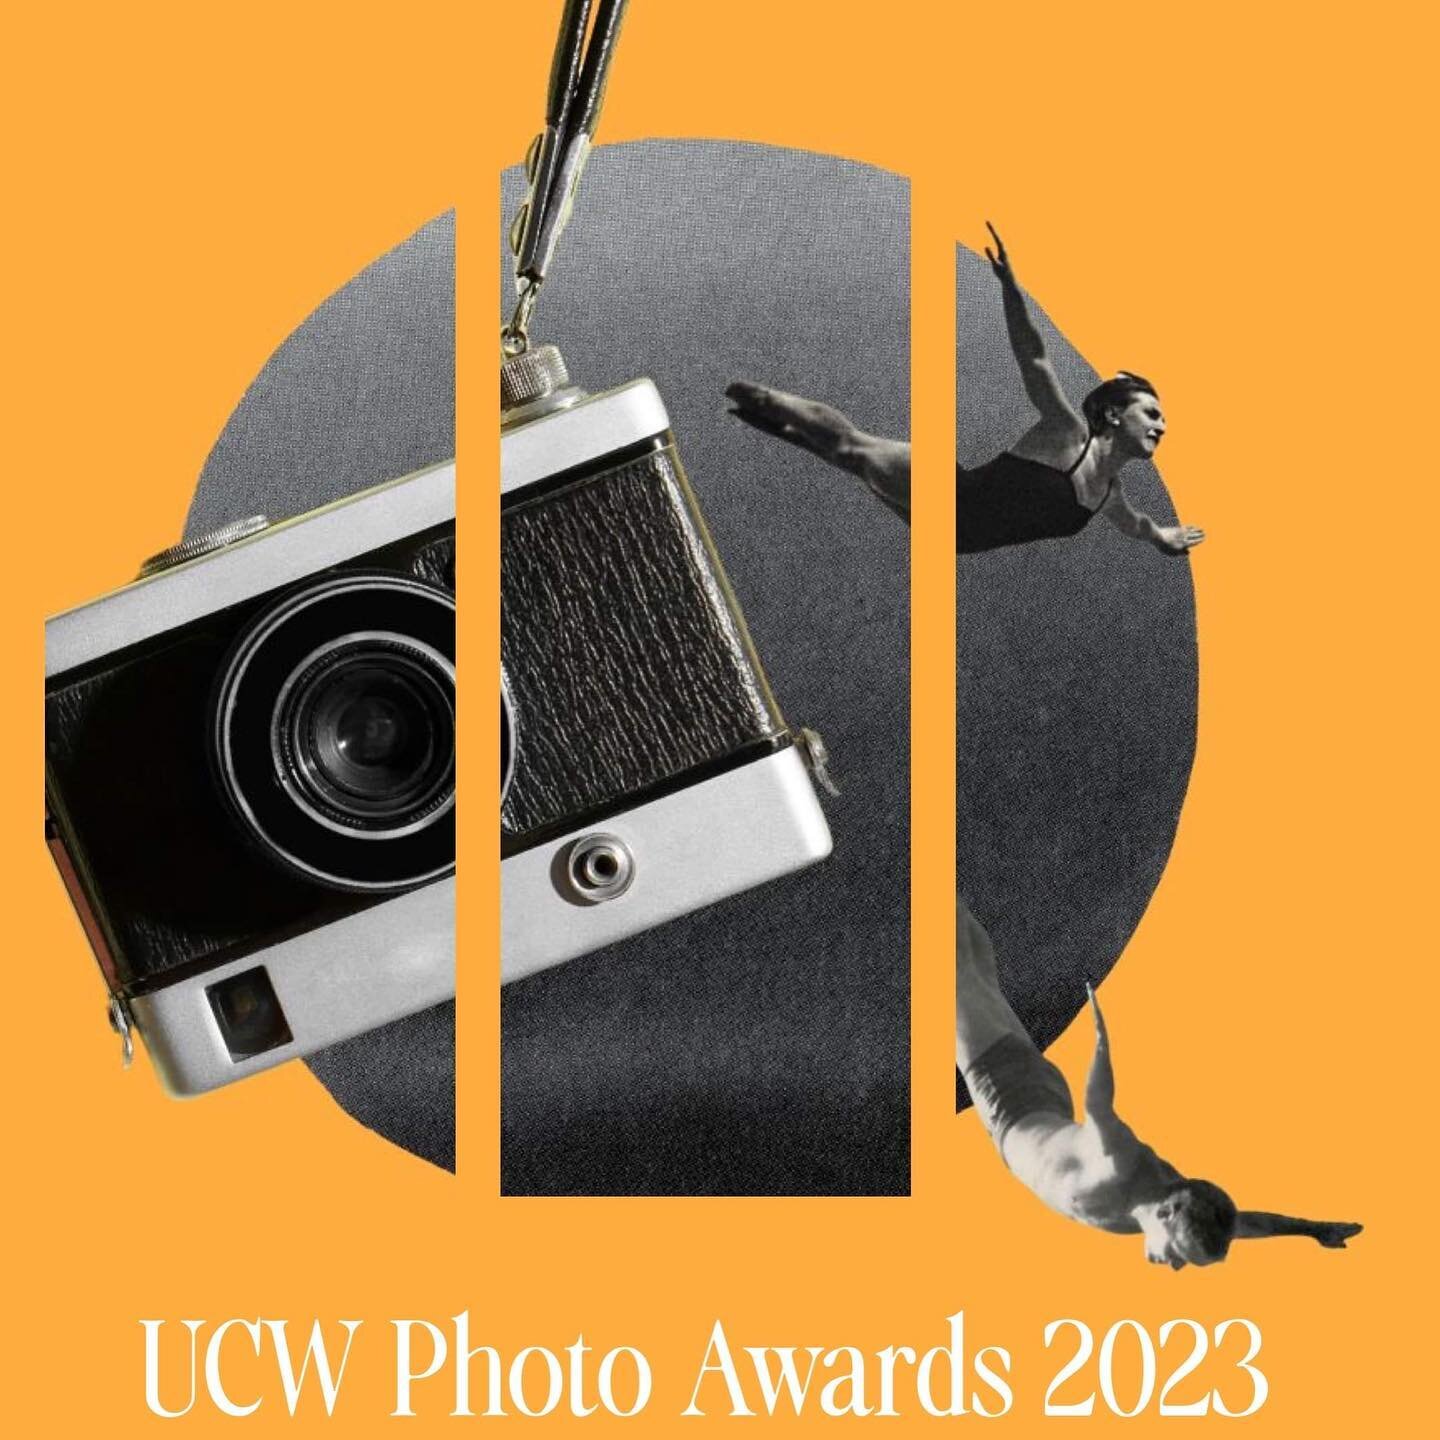 Not long to go now until our deadline for submissions approches with the last day to enter being Monday so head on over to our webpage and submit your work now to our International Open Call and Student Awards.
Where you have the chance to win &pound